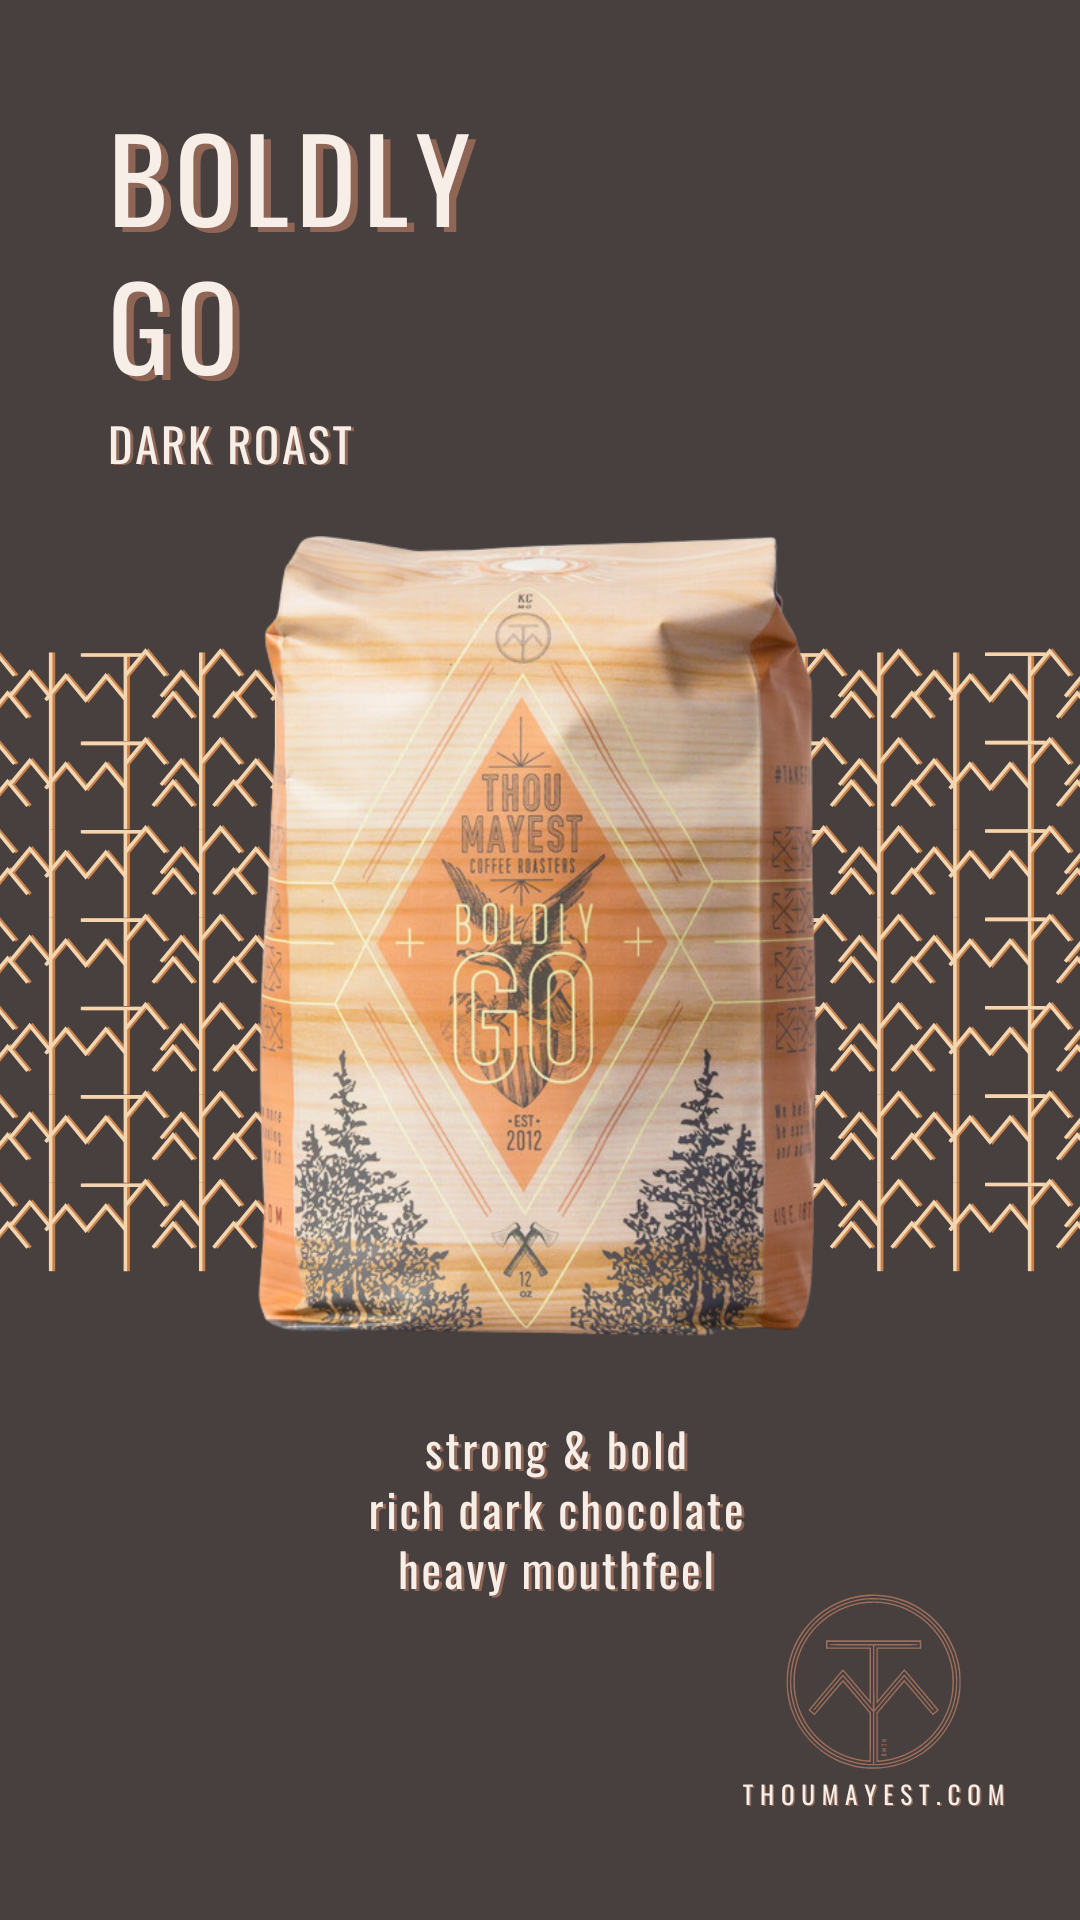 Image of our Boldly Go coffee bag with description - dark roast, strong & bold, rich dark chocolate, heavy mouthfeel. Click the image to view the product page.